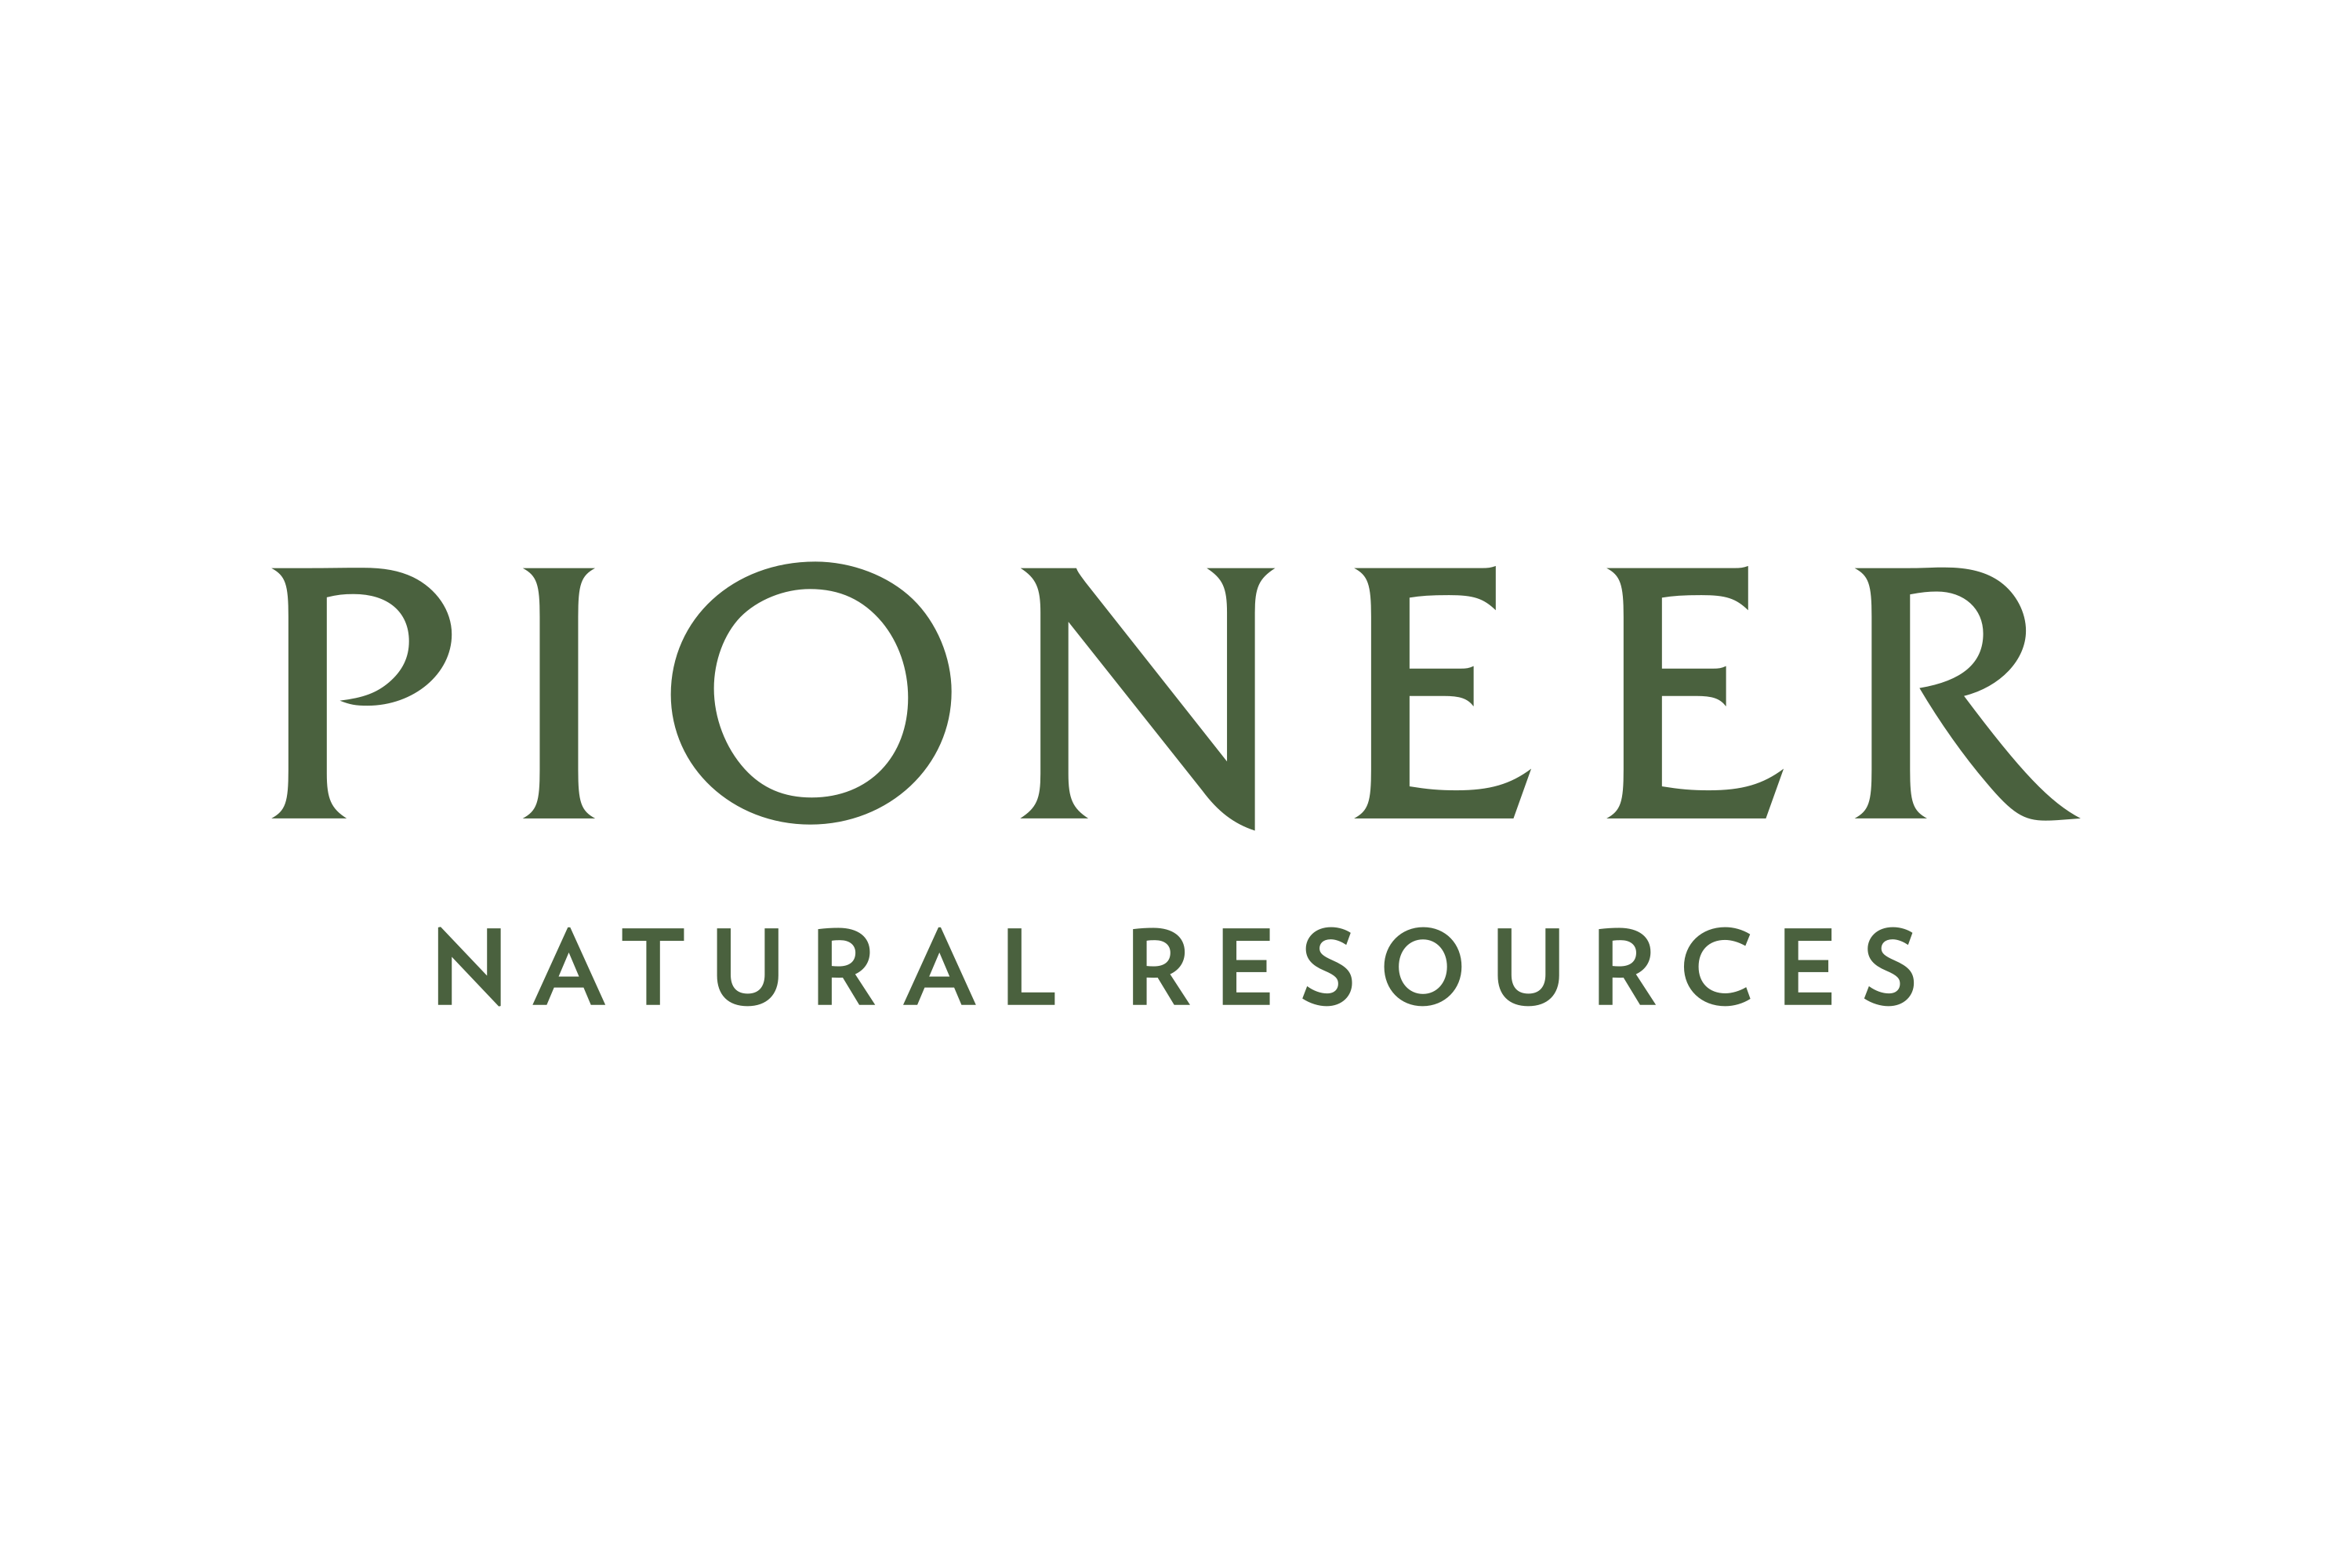 Pioneer Natural Resources Company logo